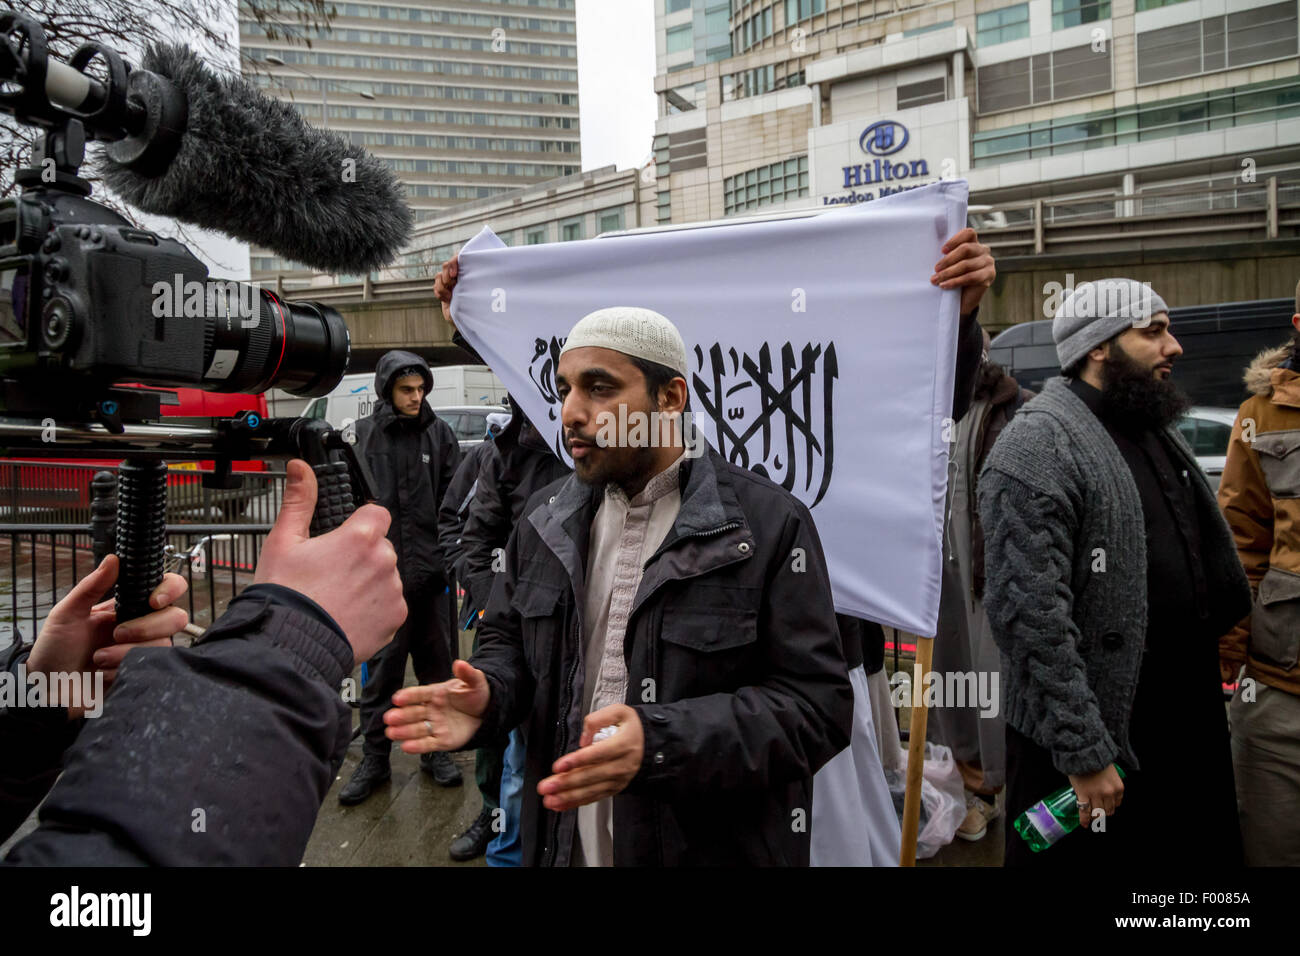 London, UK. 5th August, 2015. File Images: Radical Islamist Mohammed Mizanur Rahman (pictured here centre giving interview) charged with encouraging support for Islamic State (ISIS). It is alleged Rahman publicised support for Islamic State through lectures published online. Credit:  Guy Corbishley/Alamy Live News Stock Photo